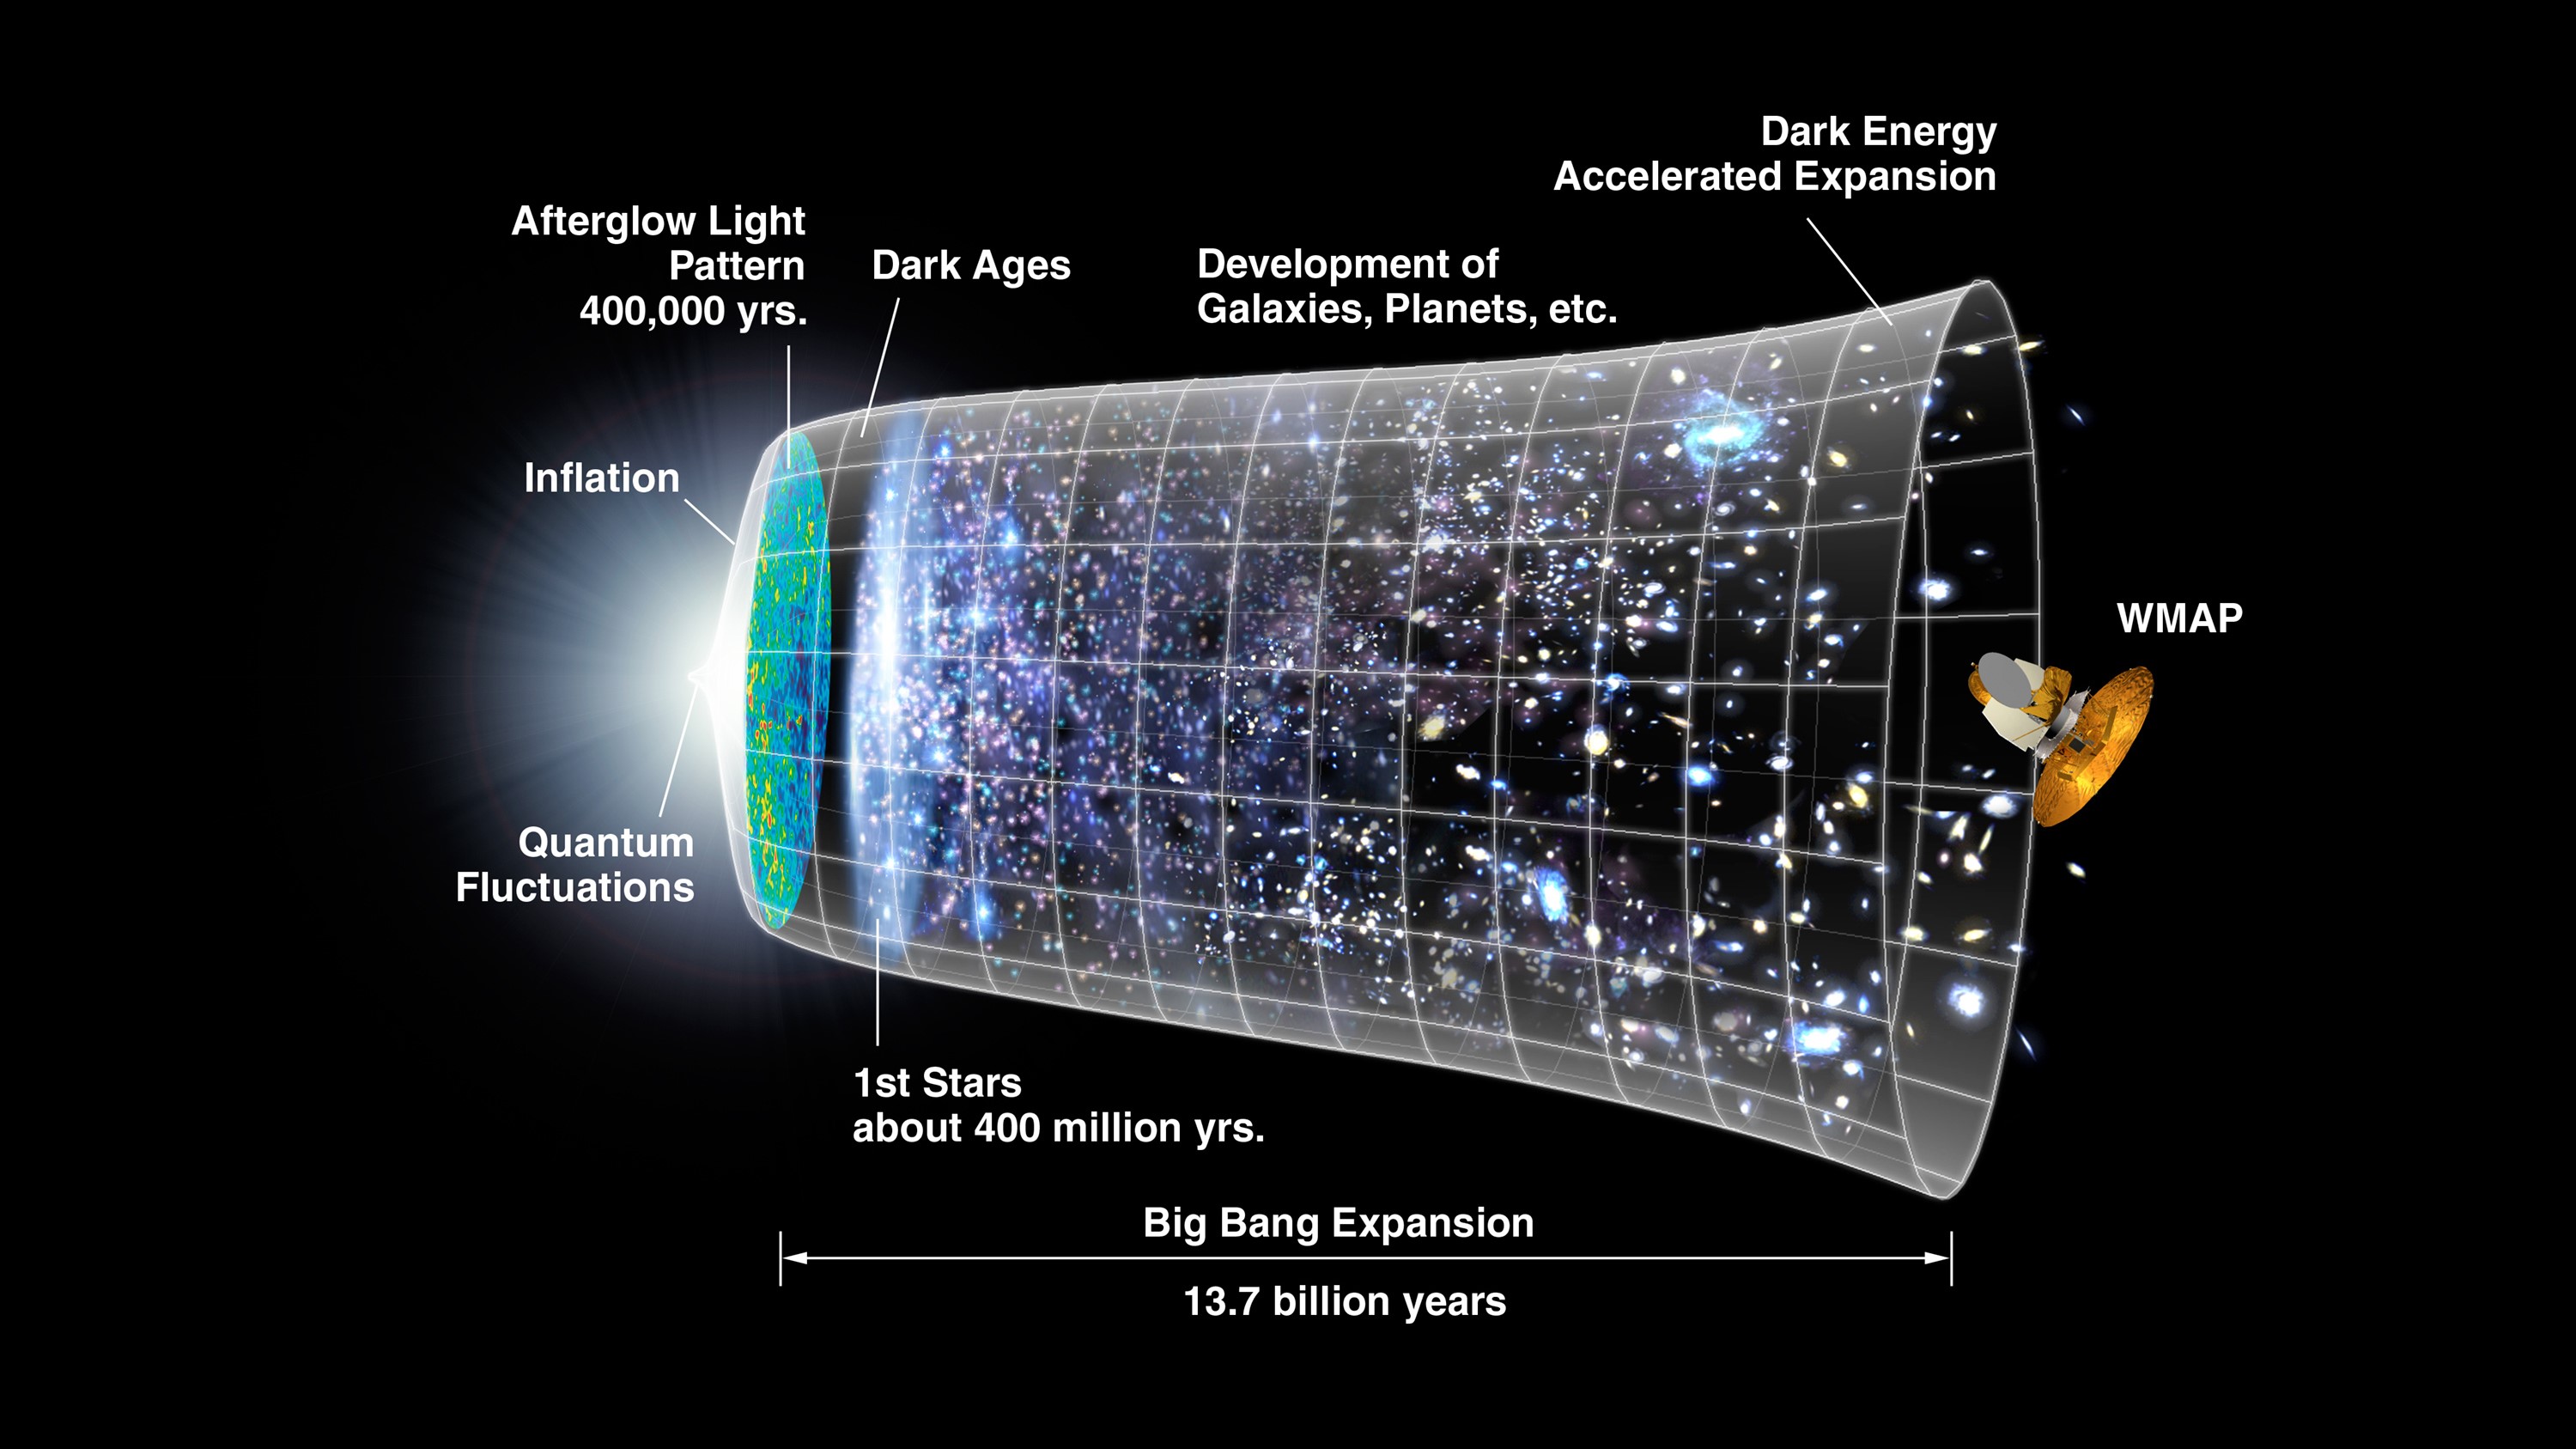 This graphic shows a timeline of the universe based on the Big Bang theory and inflation models.